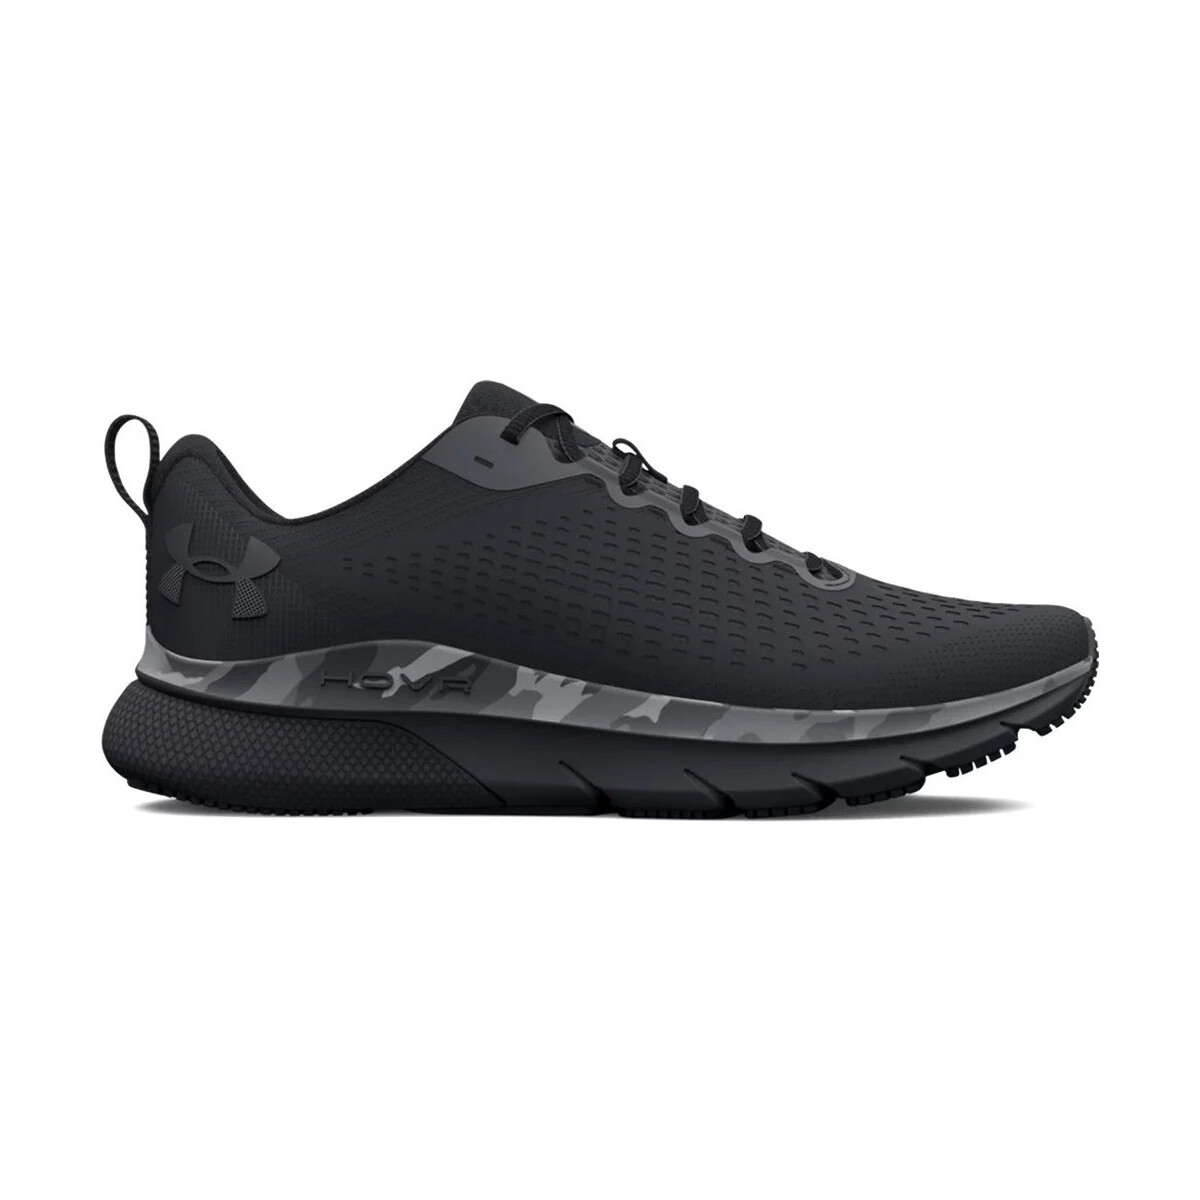 Zapatos Hombre Running / trail Under Armour UA HOVR Turbulence Print Negro